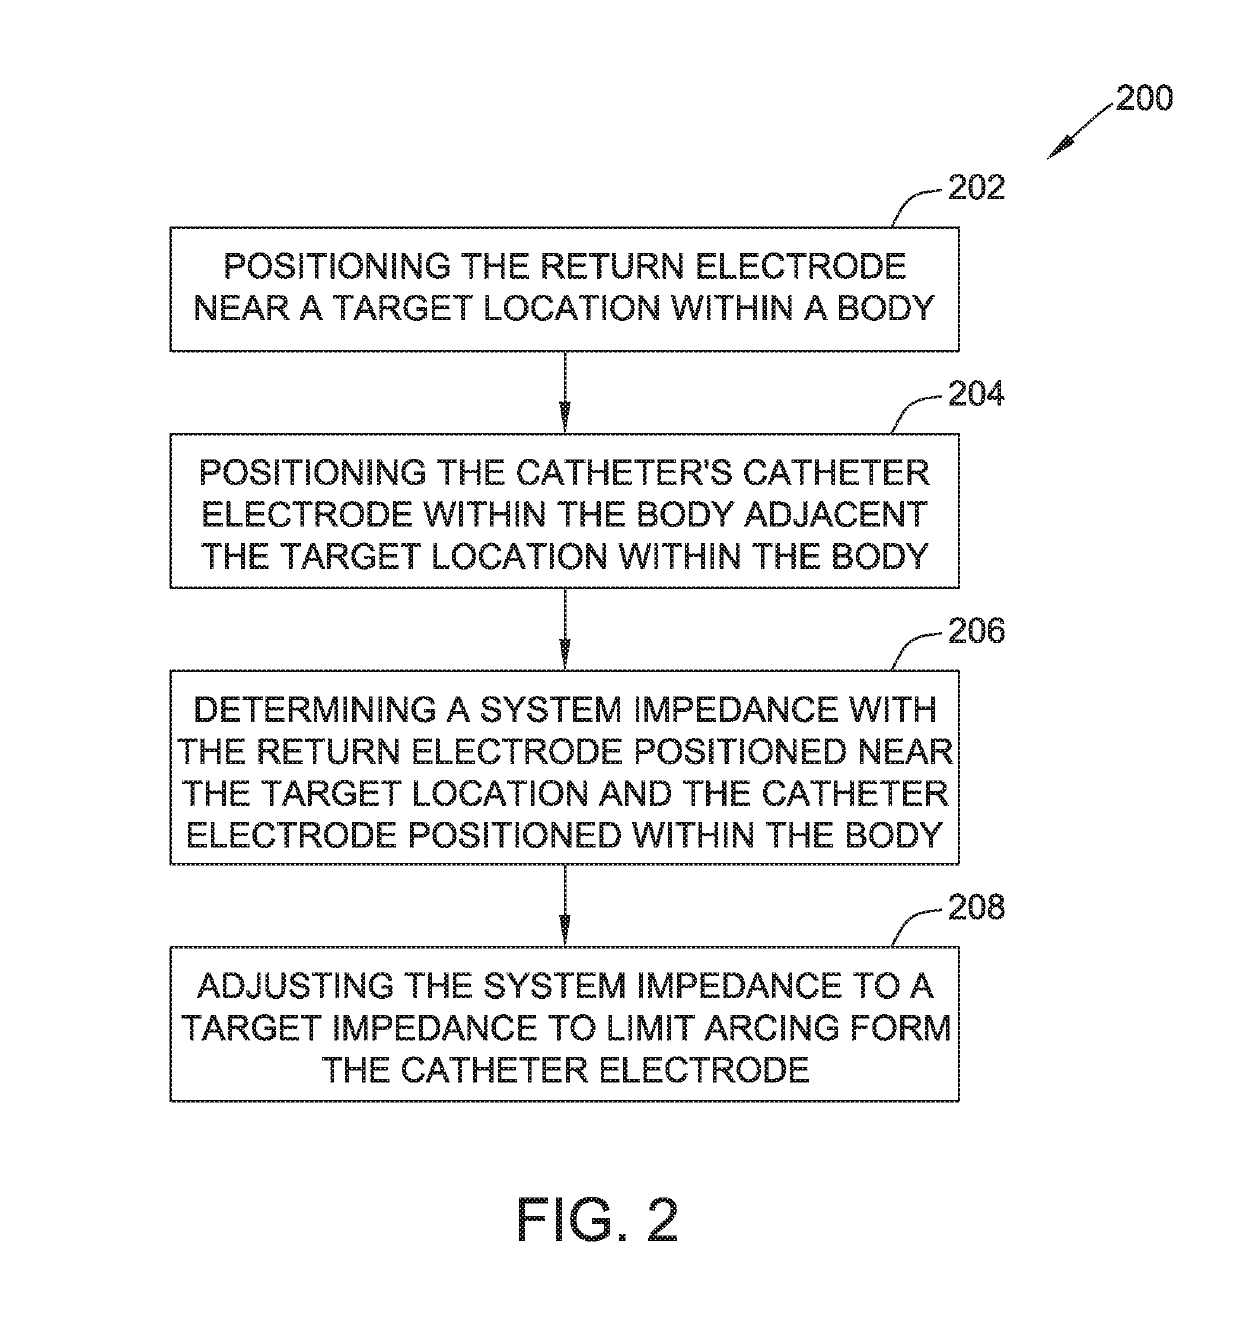 Electroporation systems and catheters for electroporation systems